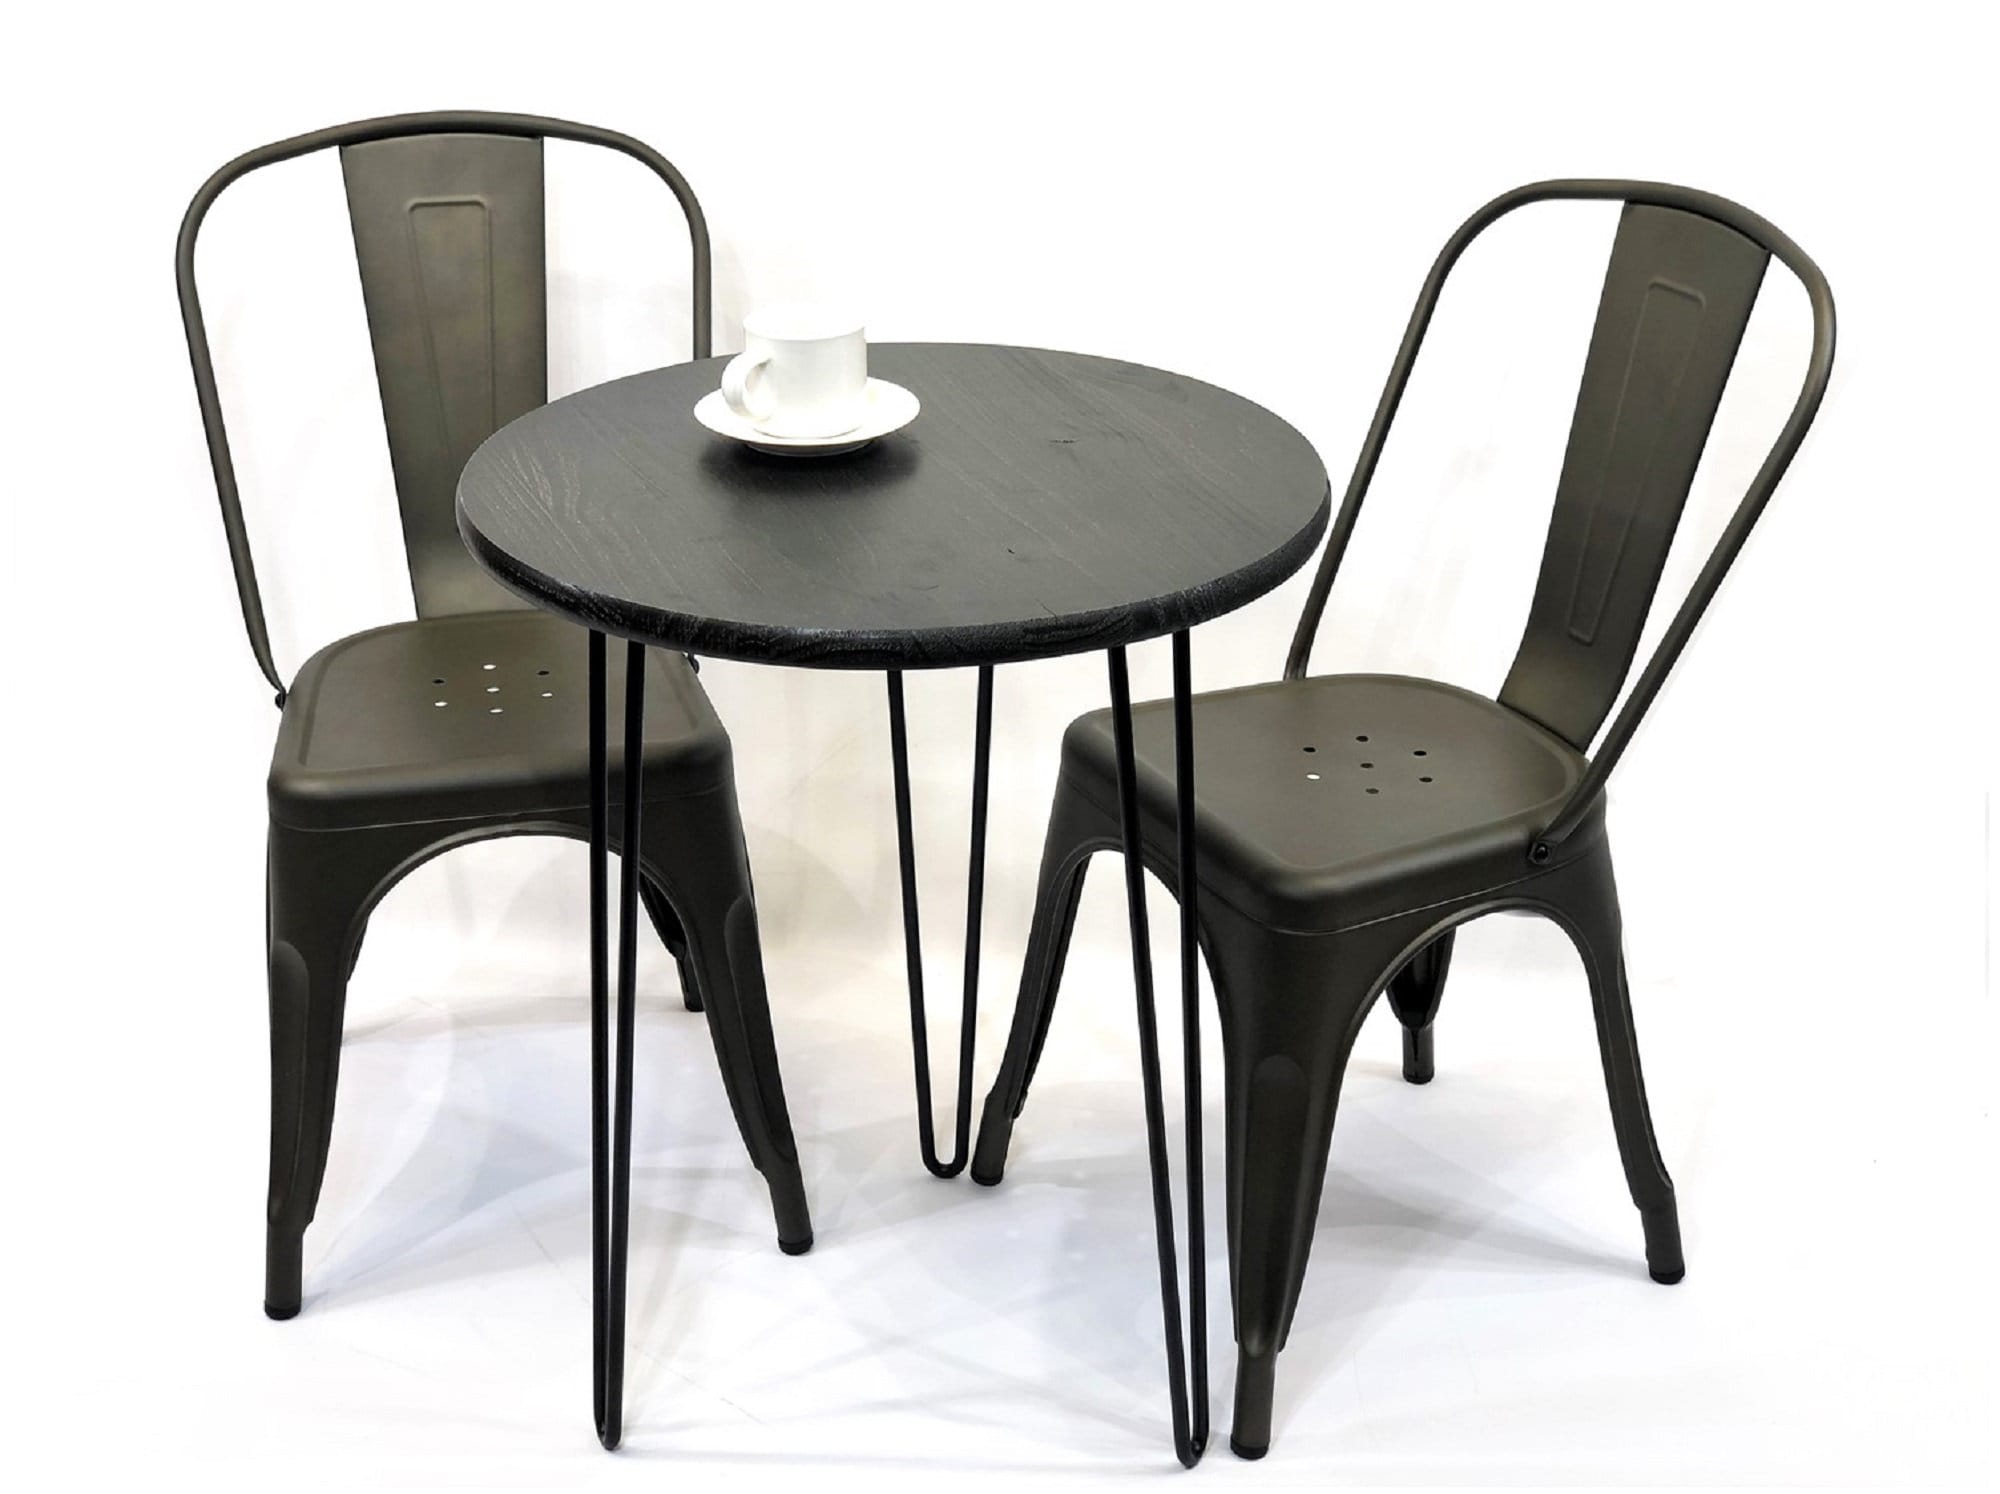 Cafe Table with 2 Chairs in Ebony with Hairpin Legs